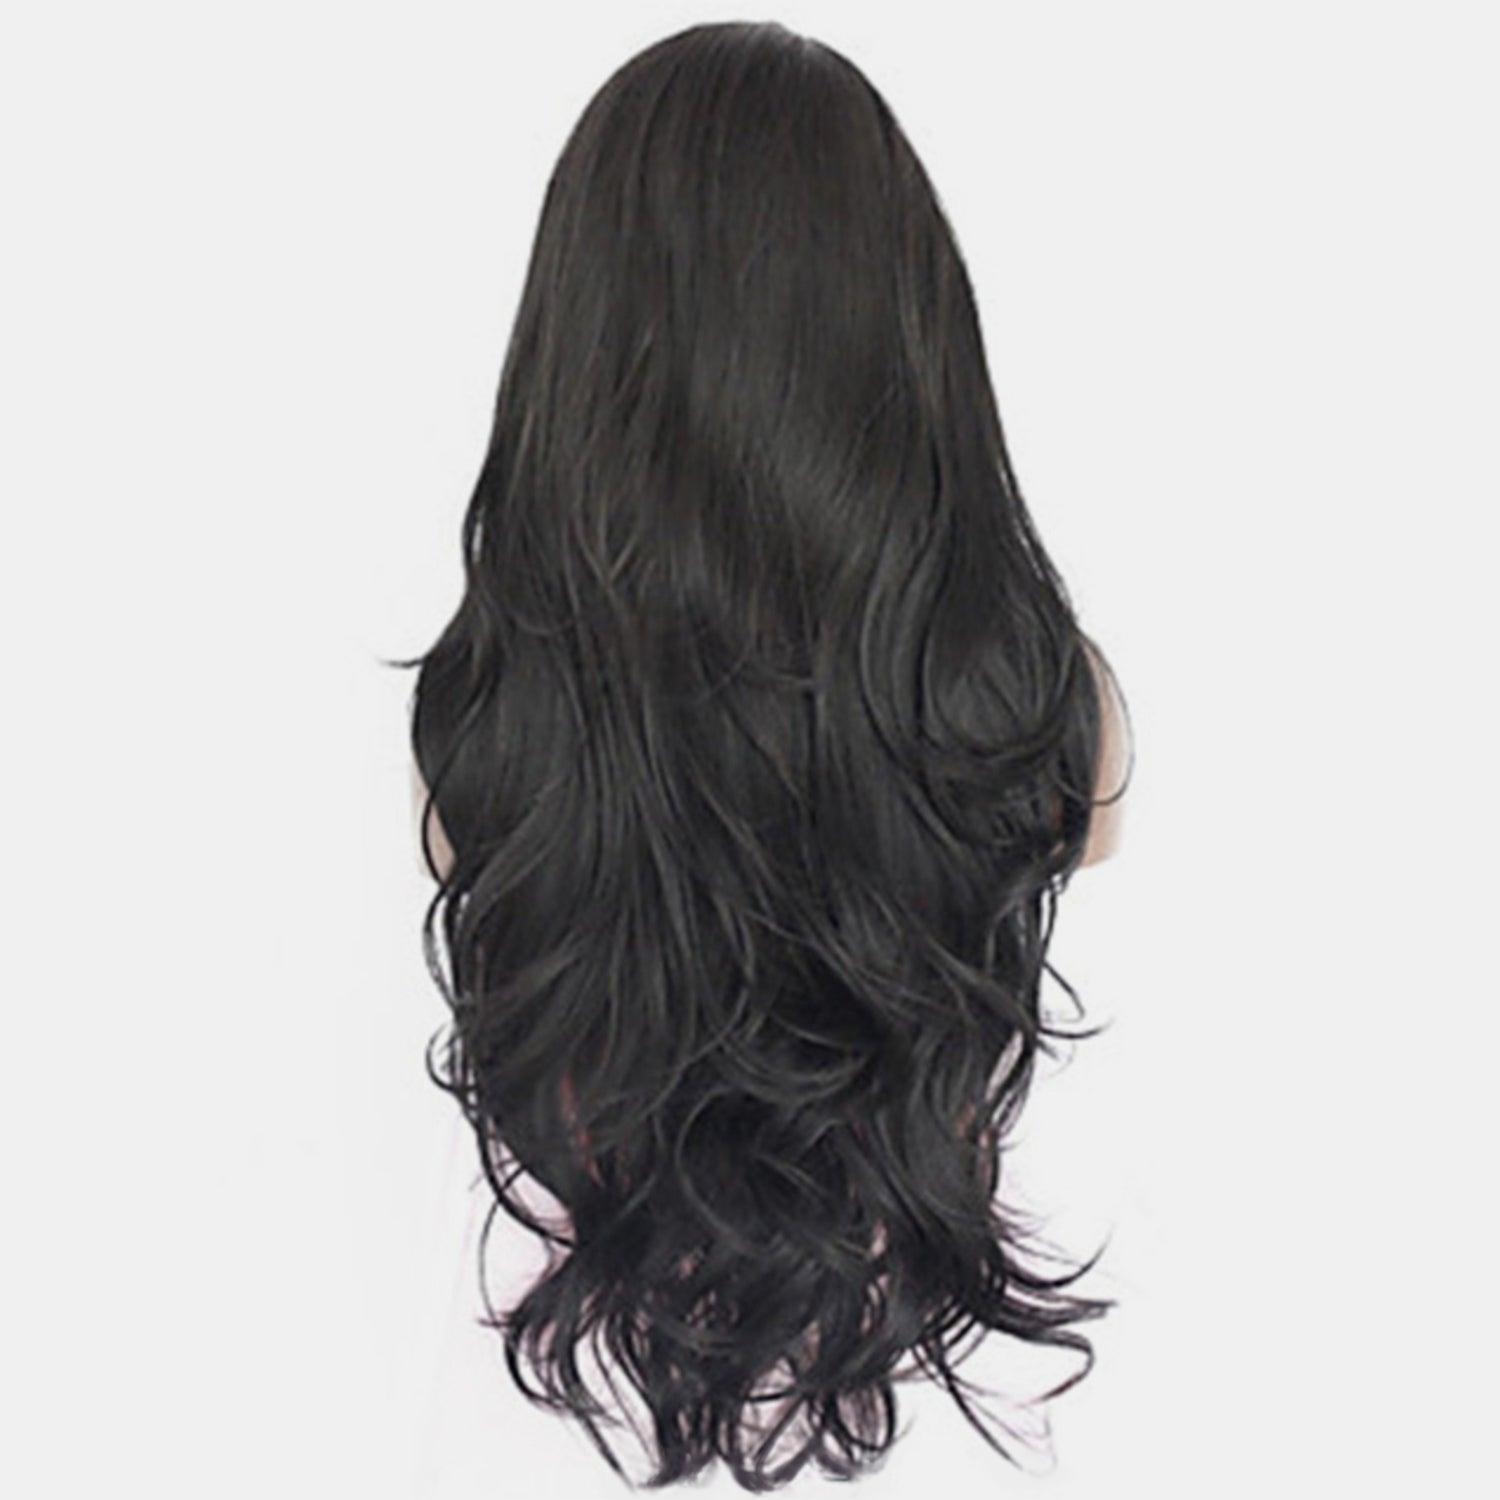 a woman's long black wig with bangs